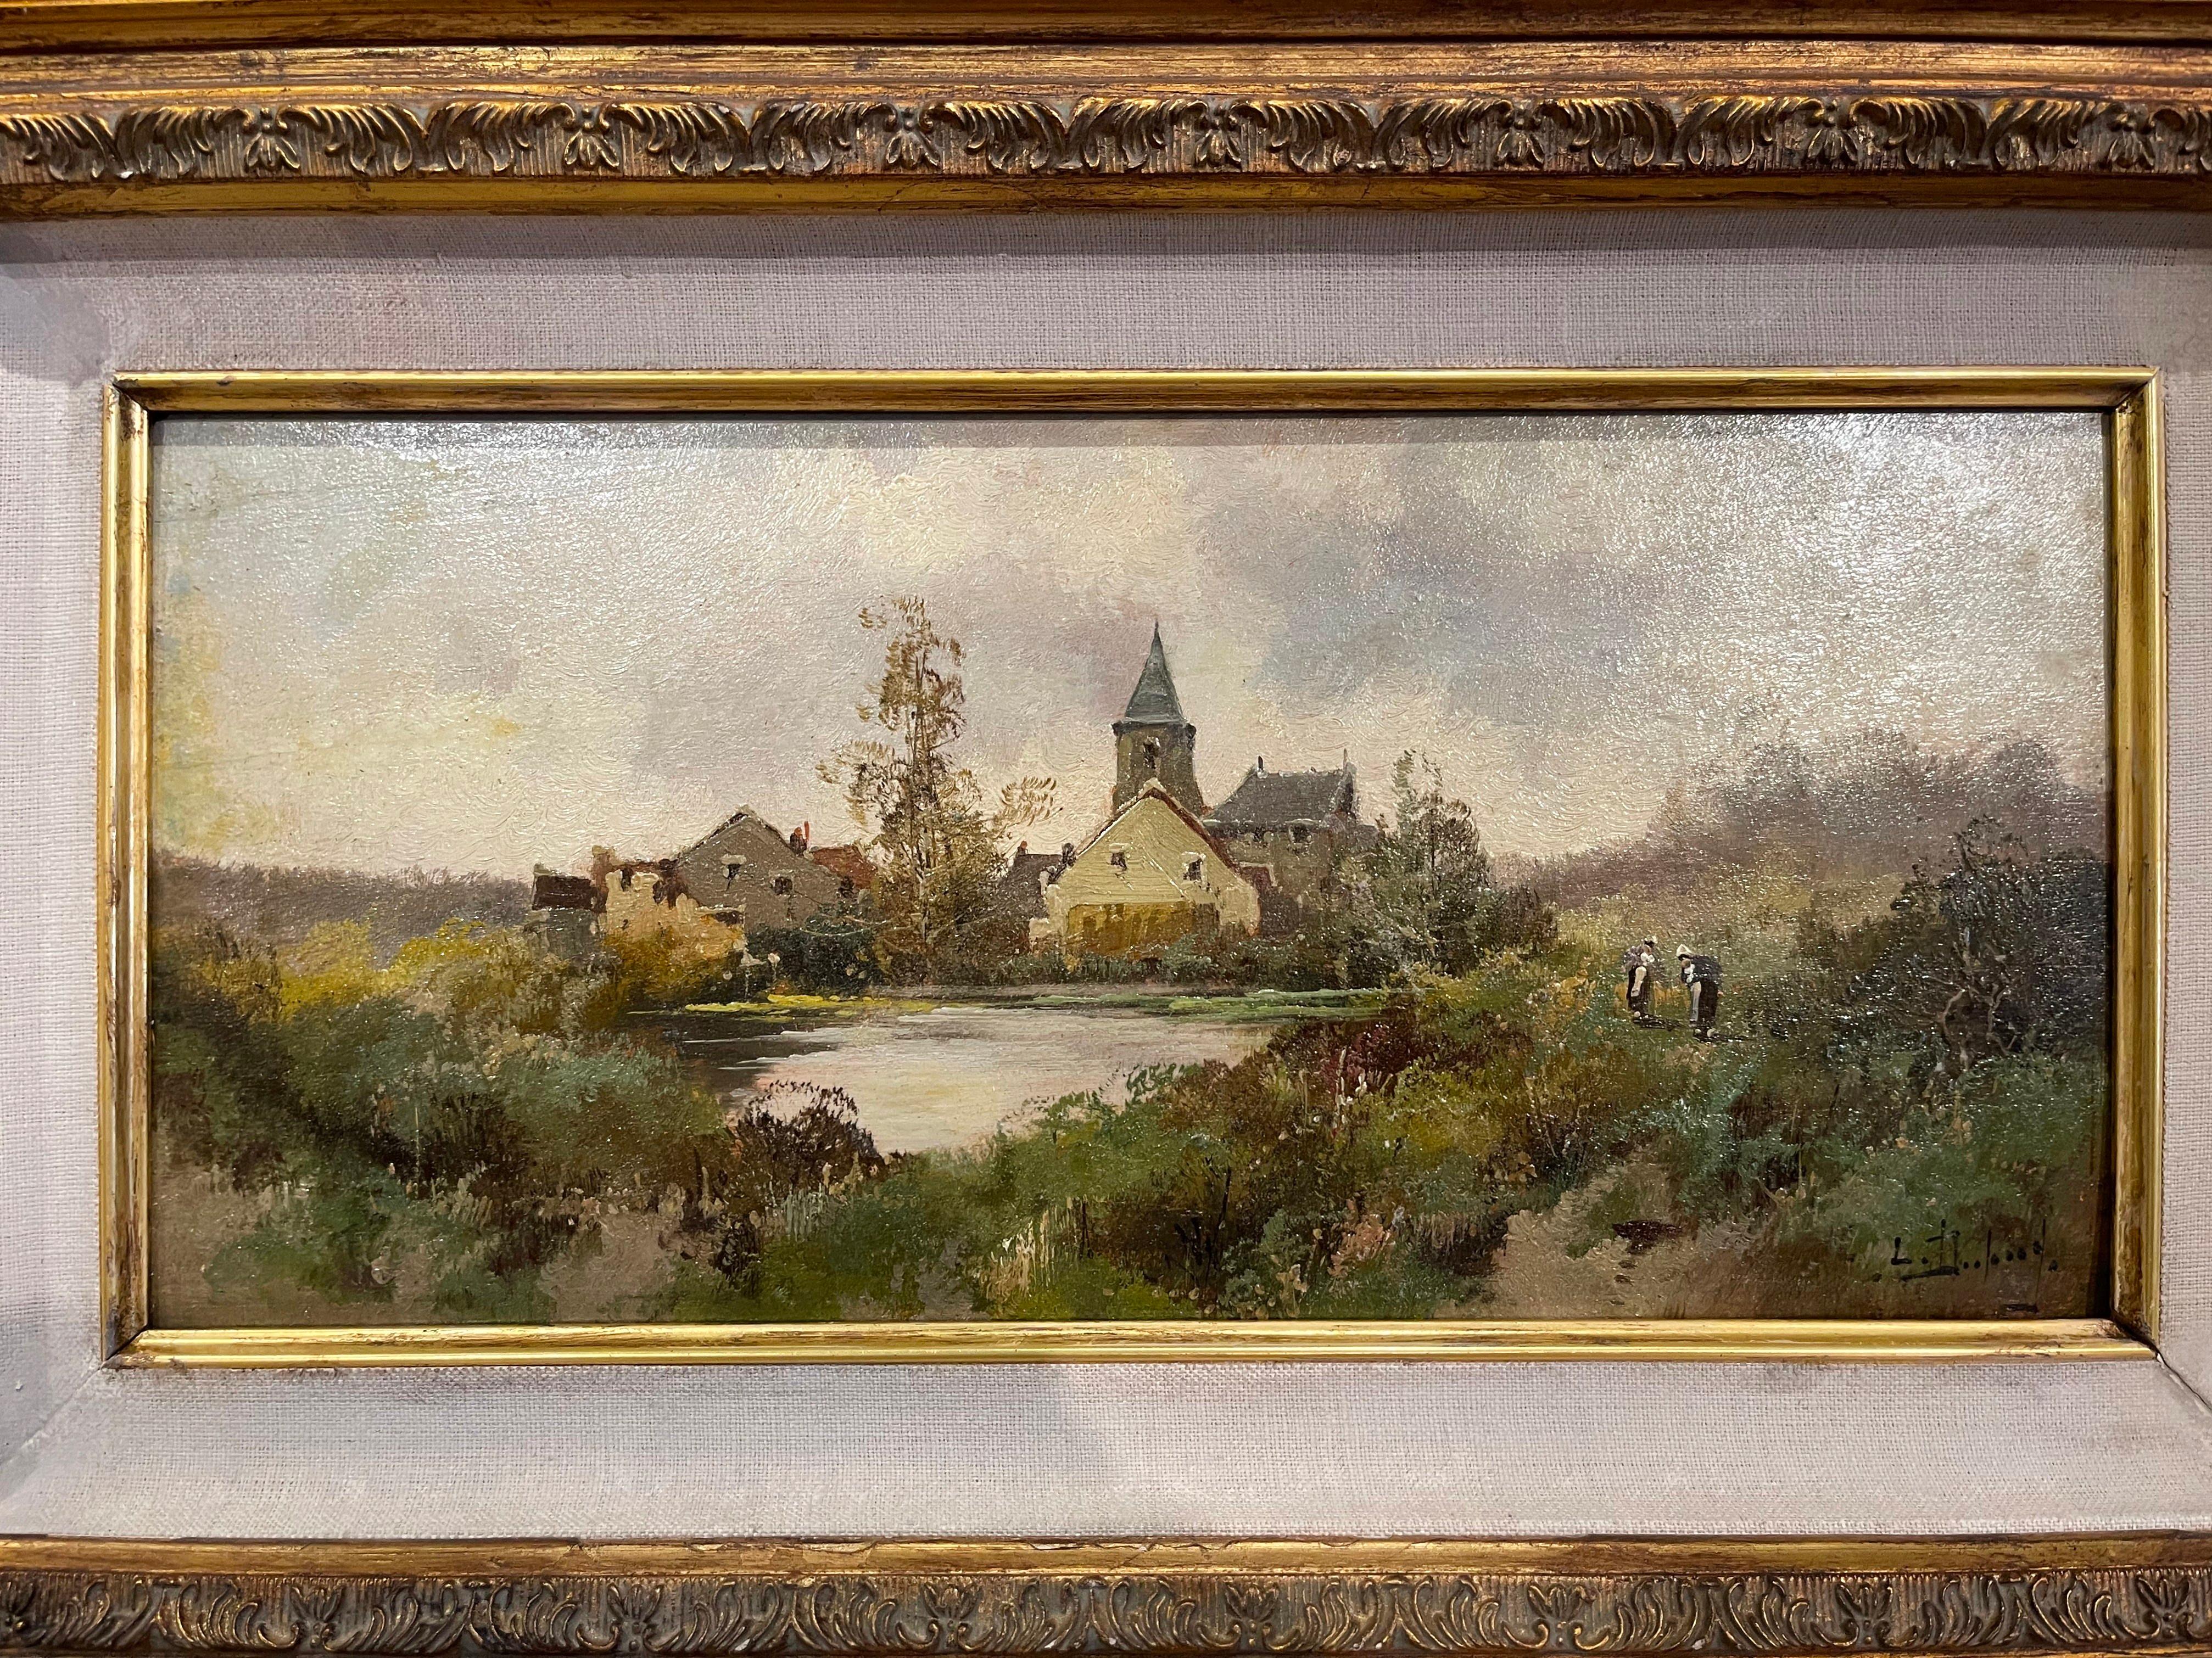 Carved Set of 3 Framed Oil on Board Paintings Signed Leon Dupuy for E. Galien-Laloue For Sale